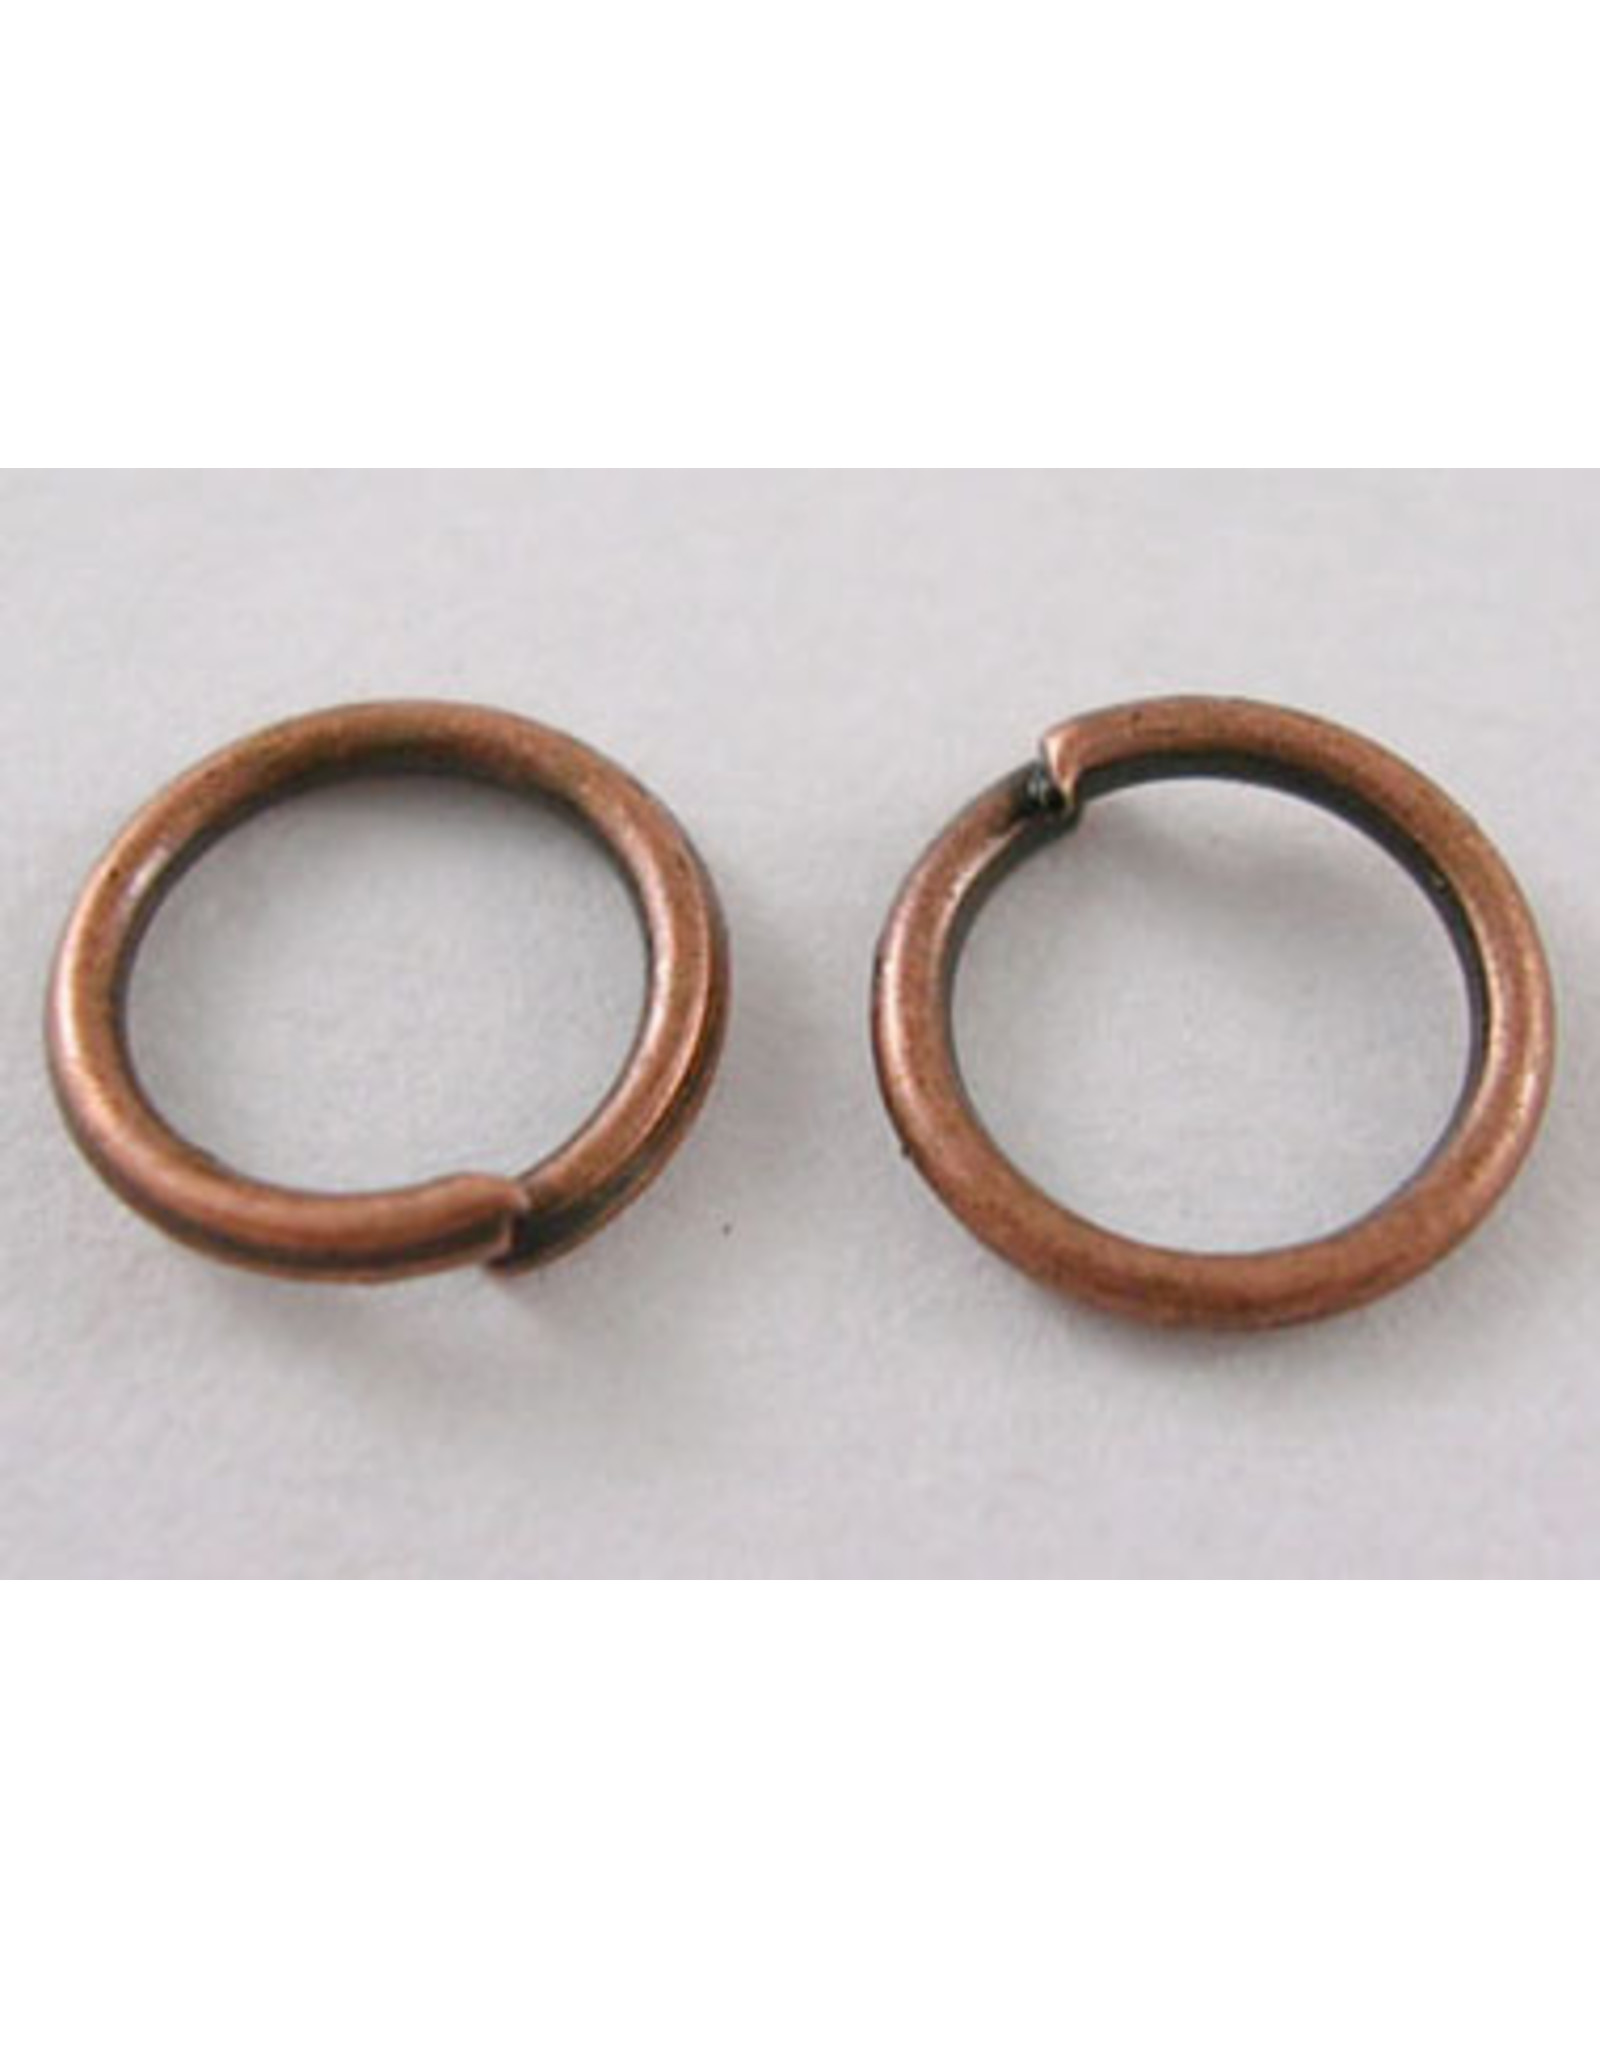 Jump Ring 8mm Antique Copper  approx 20g  x100 NF